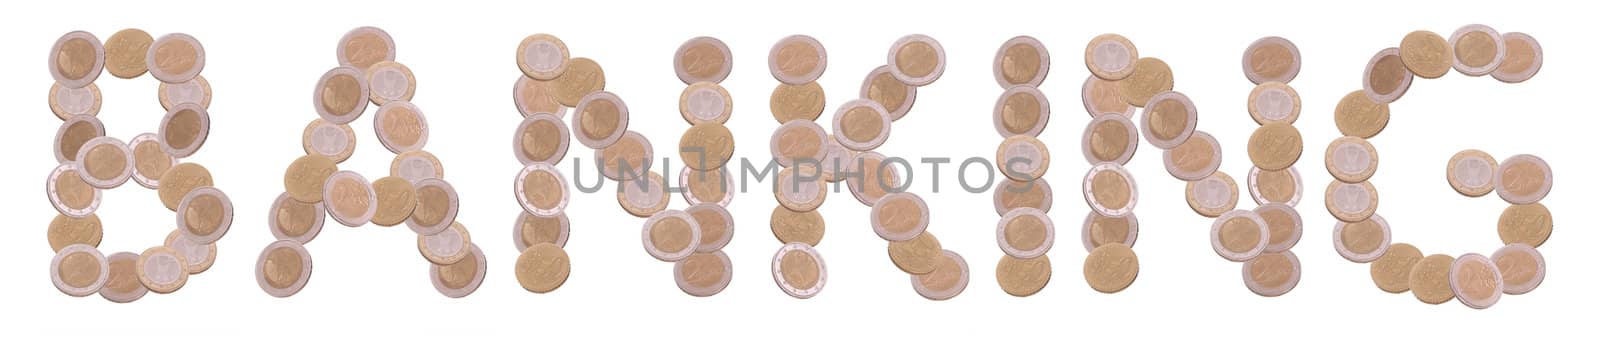 banking - written with coins on white background